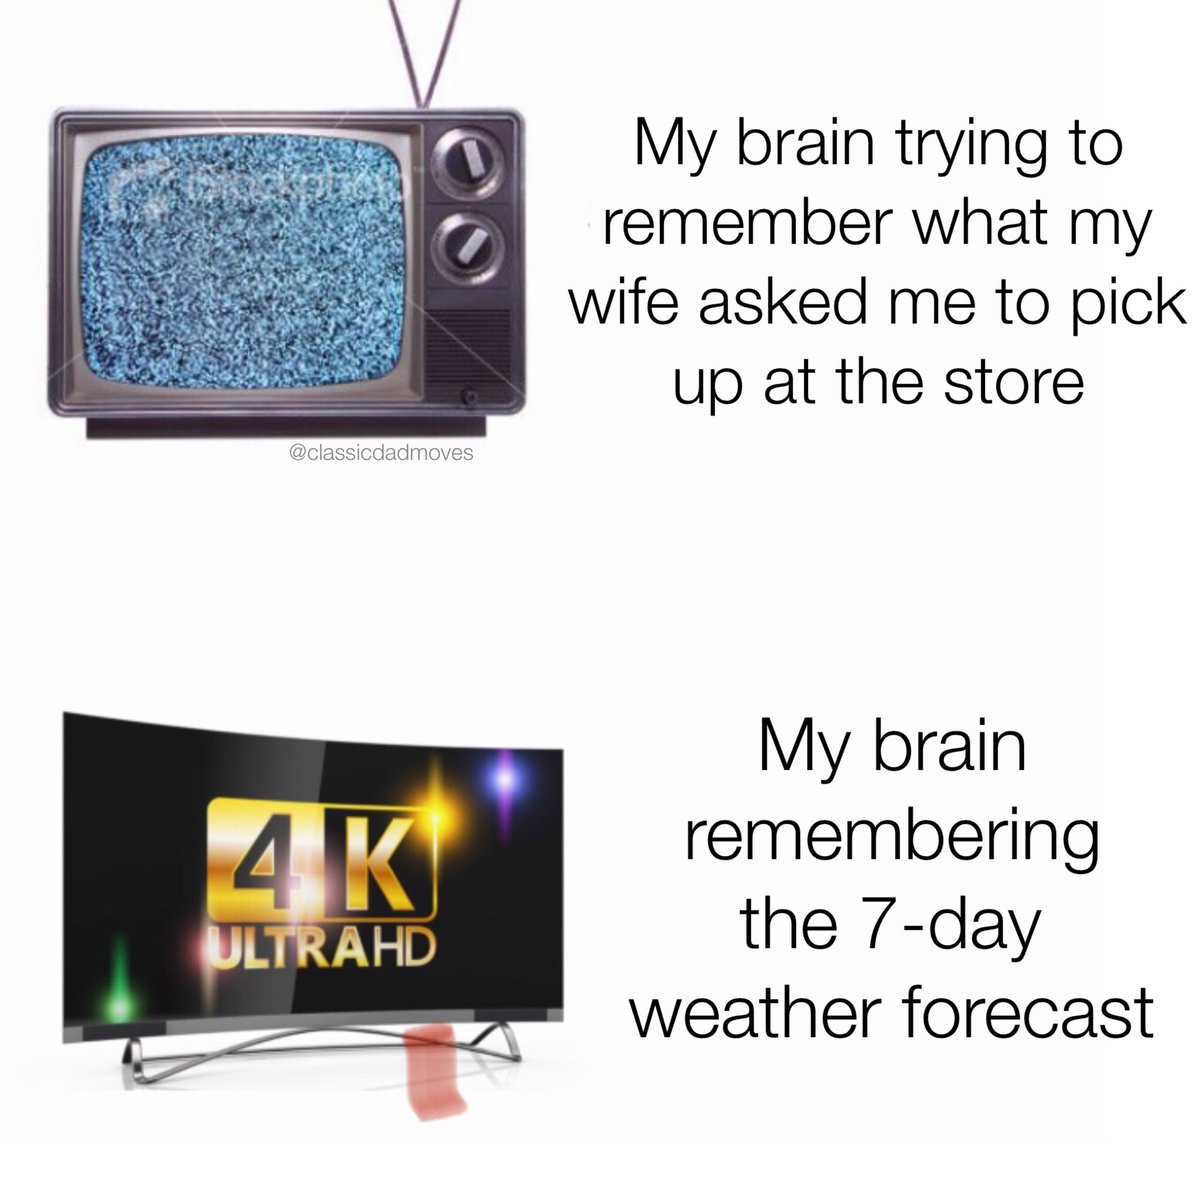 Dank Dad Memes - old tv - 4K Ultrahd My brain trying to remember what my wife asked me to pick up at the store My brain remembering the 7day weather forecast